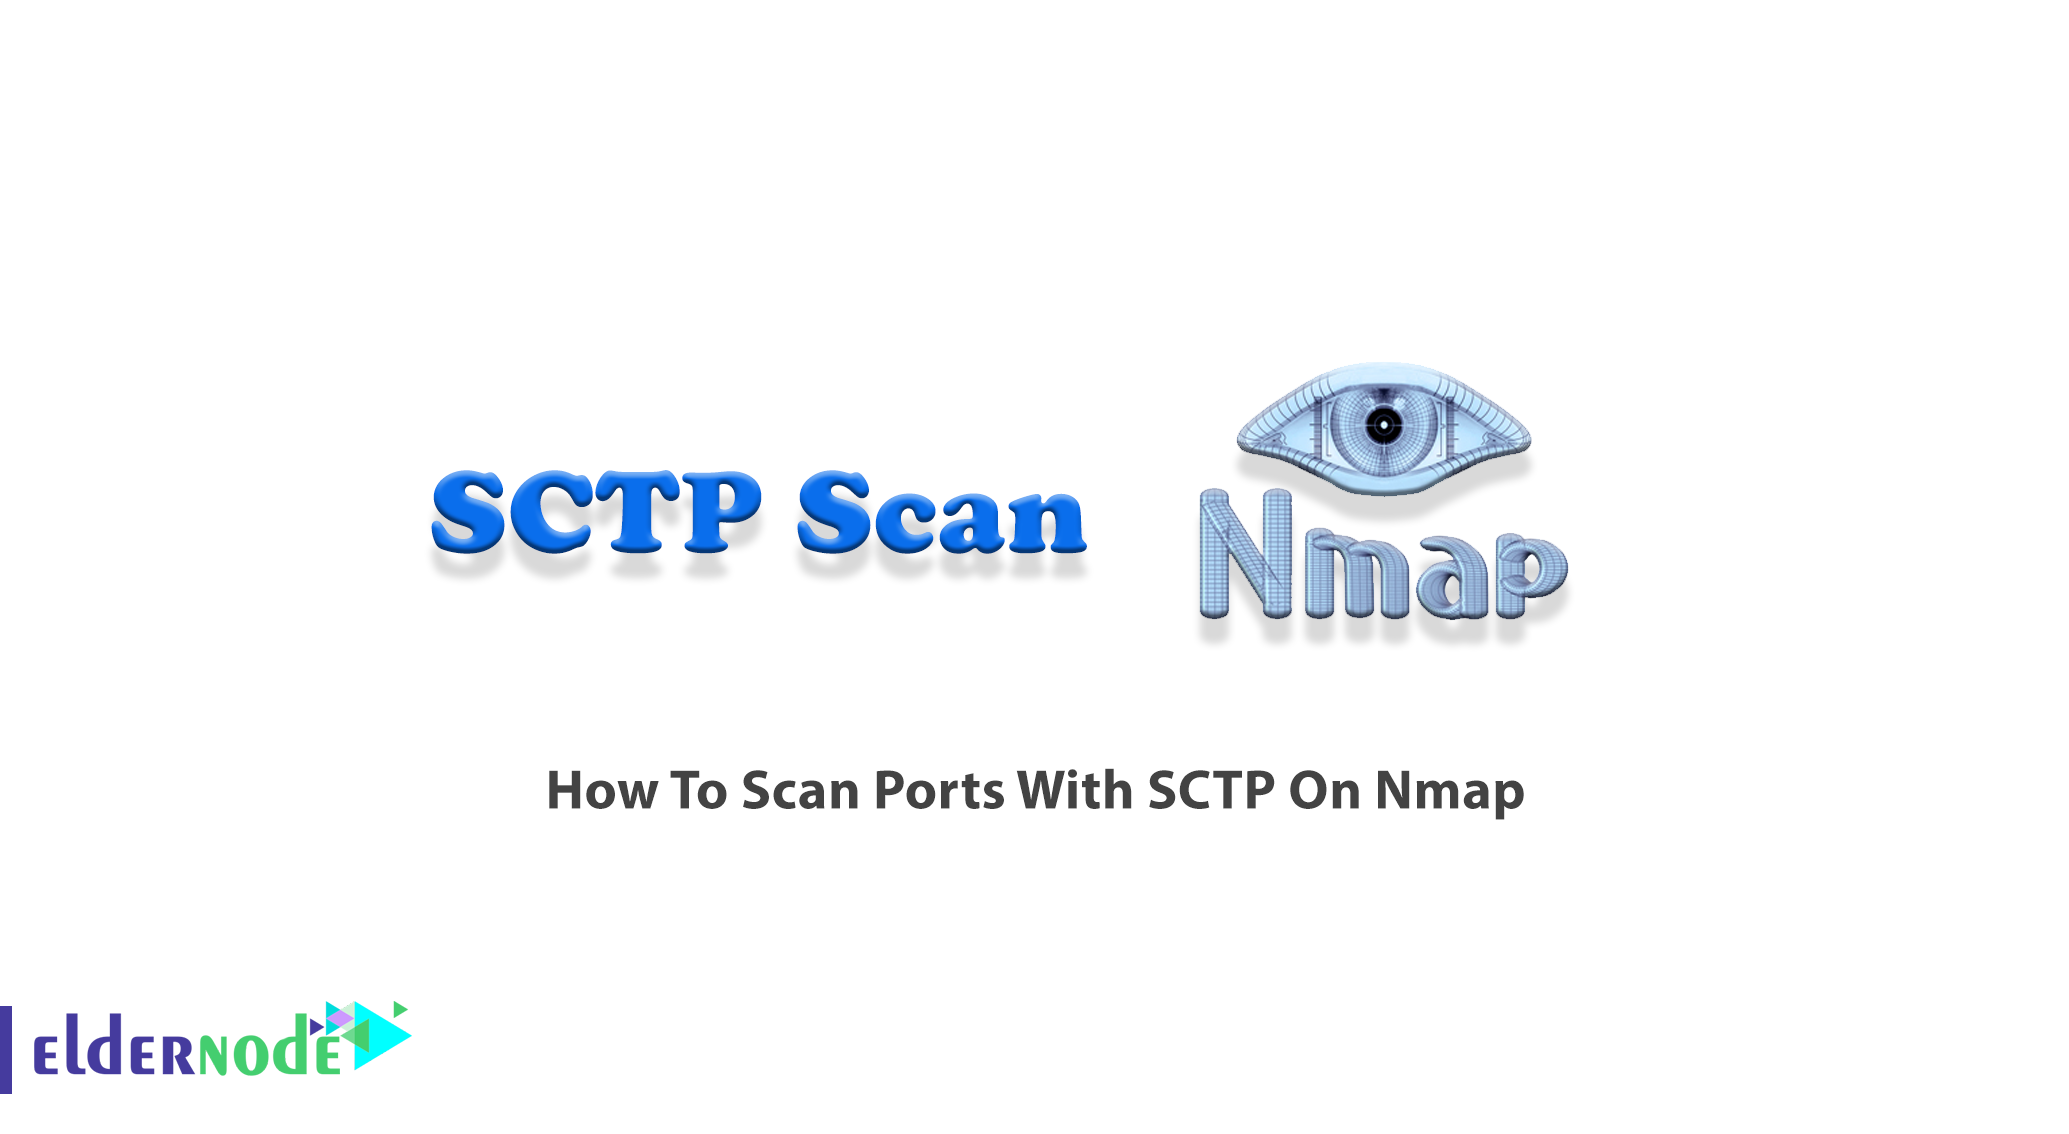 How To Scan Ports With SCTP On Nmap